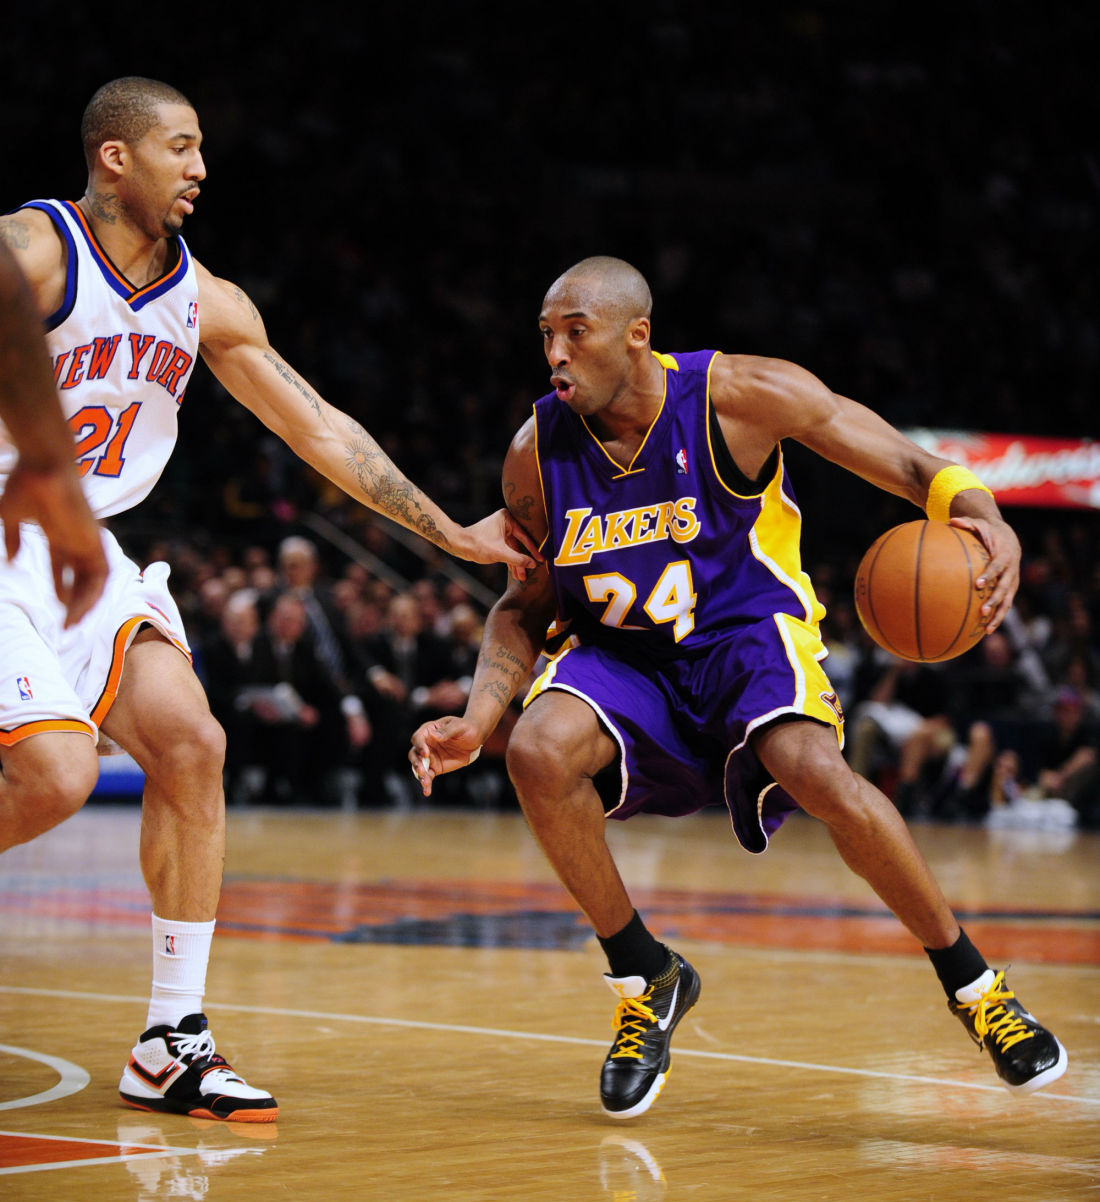 Kobe Bryant Best Games Jersey Number 8 & 24 | Sole Collector1100 x 1202